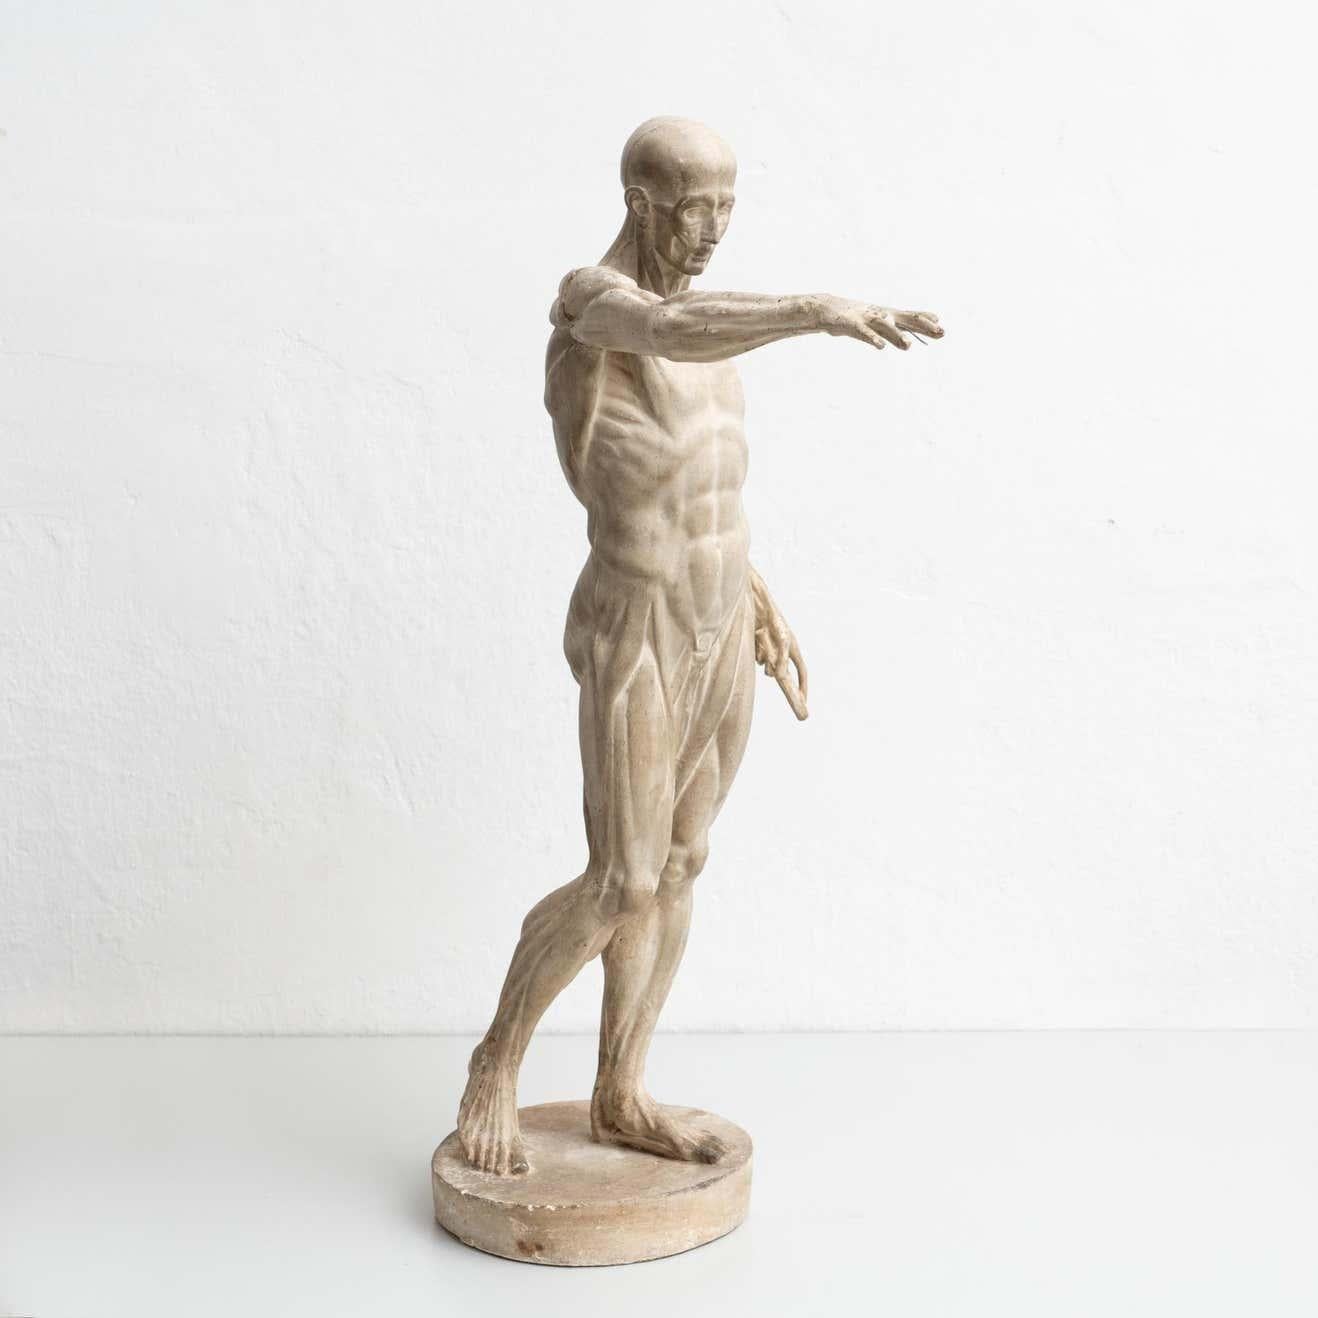 If you're a collector of art and design searching for exclusive, one-of-a-kind pieces, this human anatomy sculpture is perfect for you.

This exceptional early plaster sculpture represents a man's body and was created in Spain circa 1930. It comes